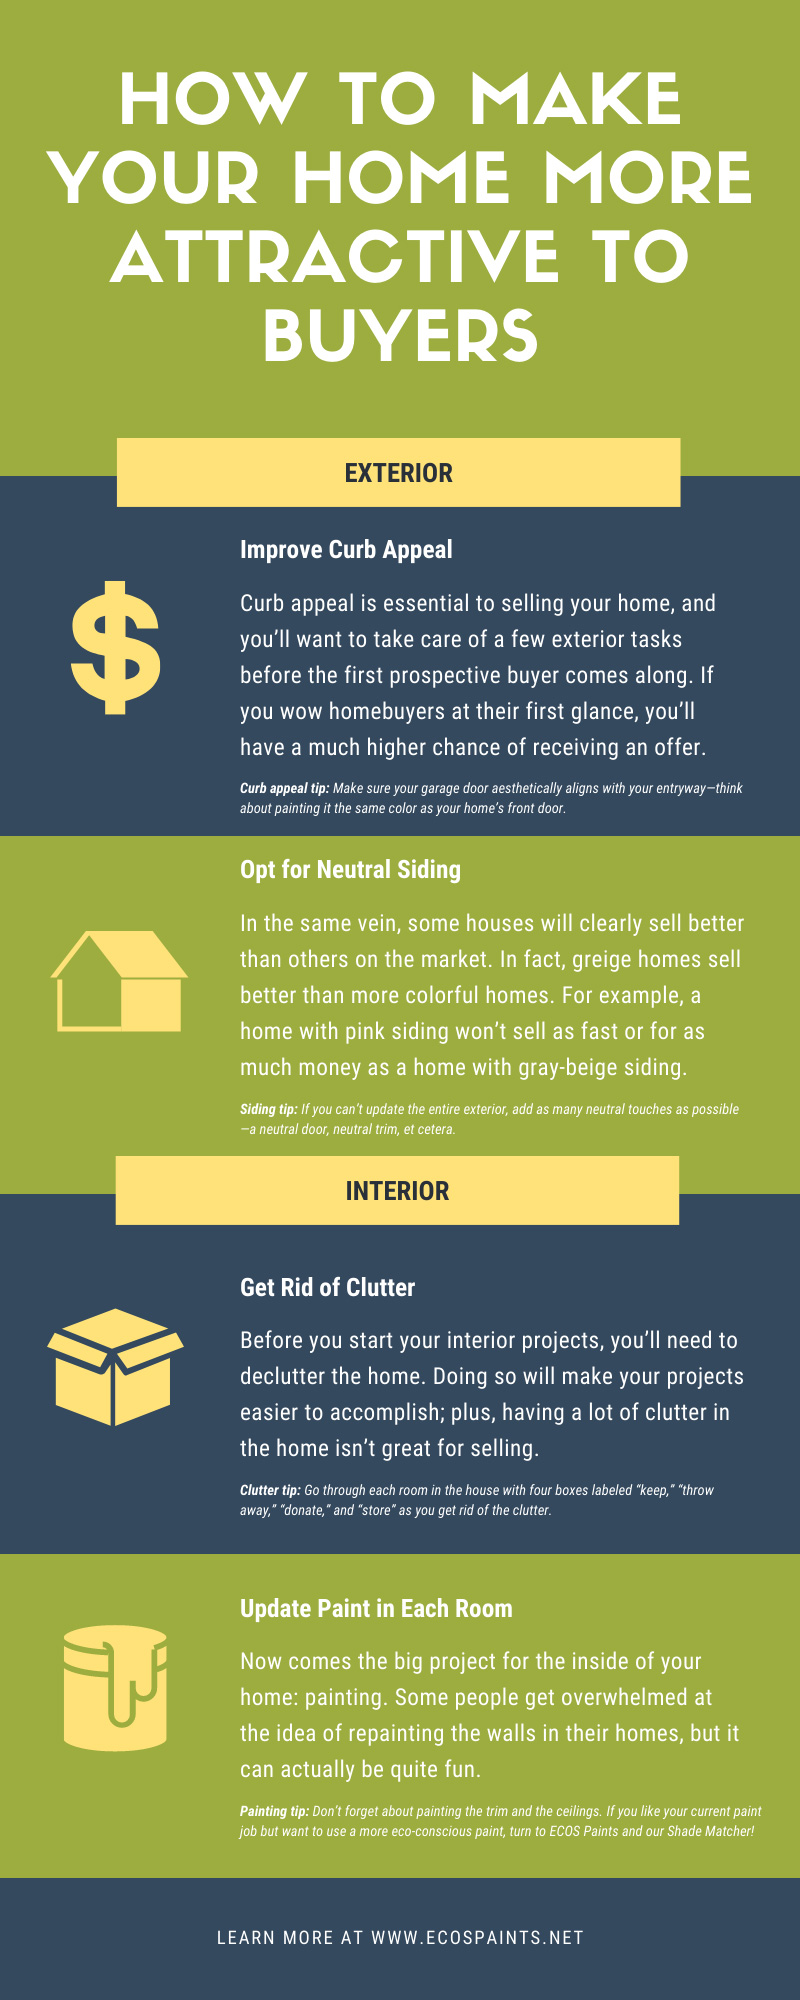 Make Your Home Attractive to Buyers